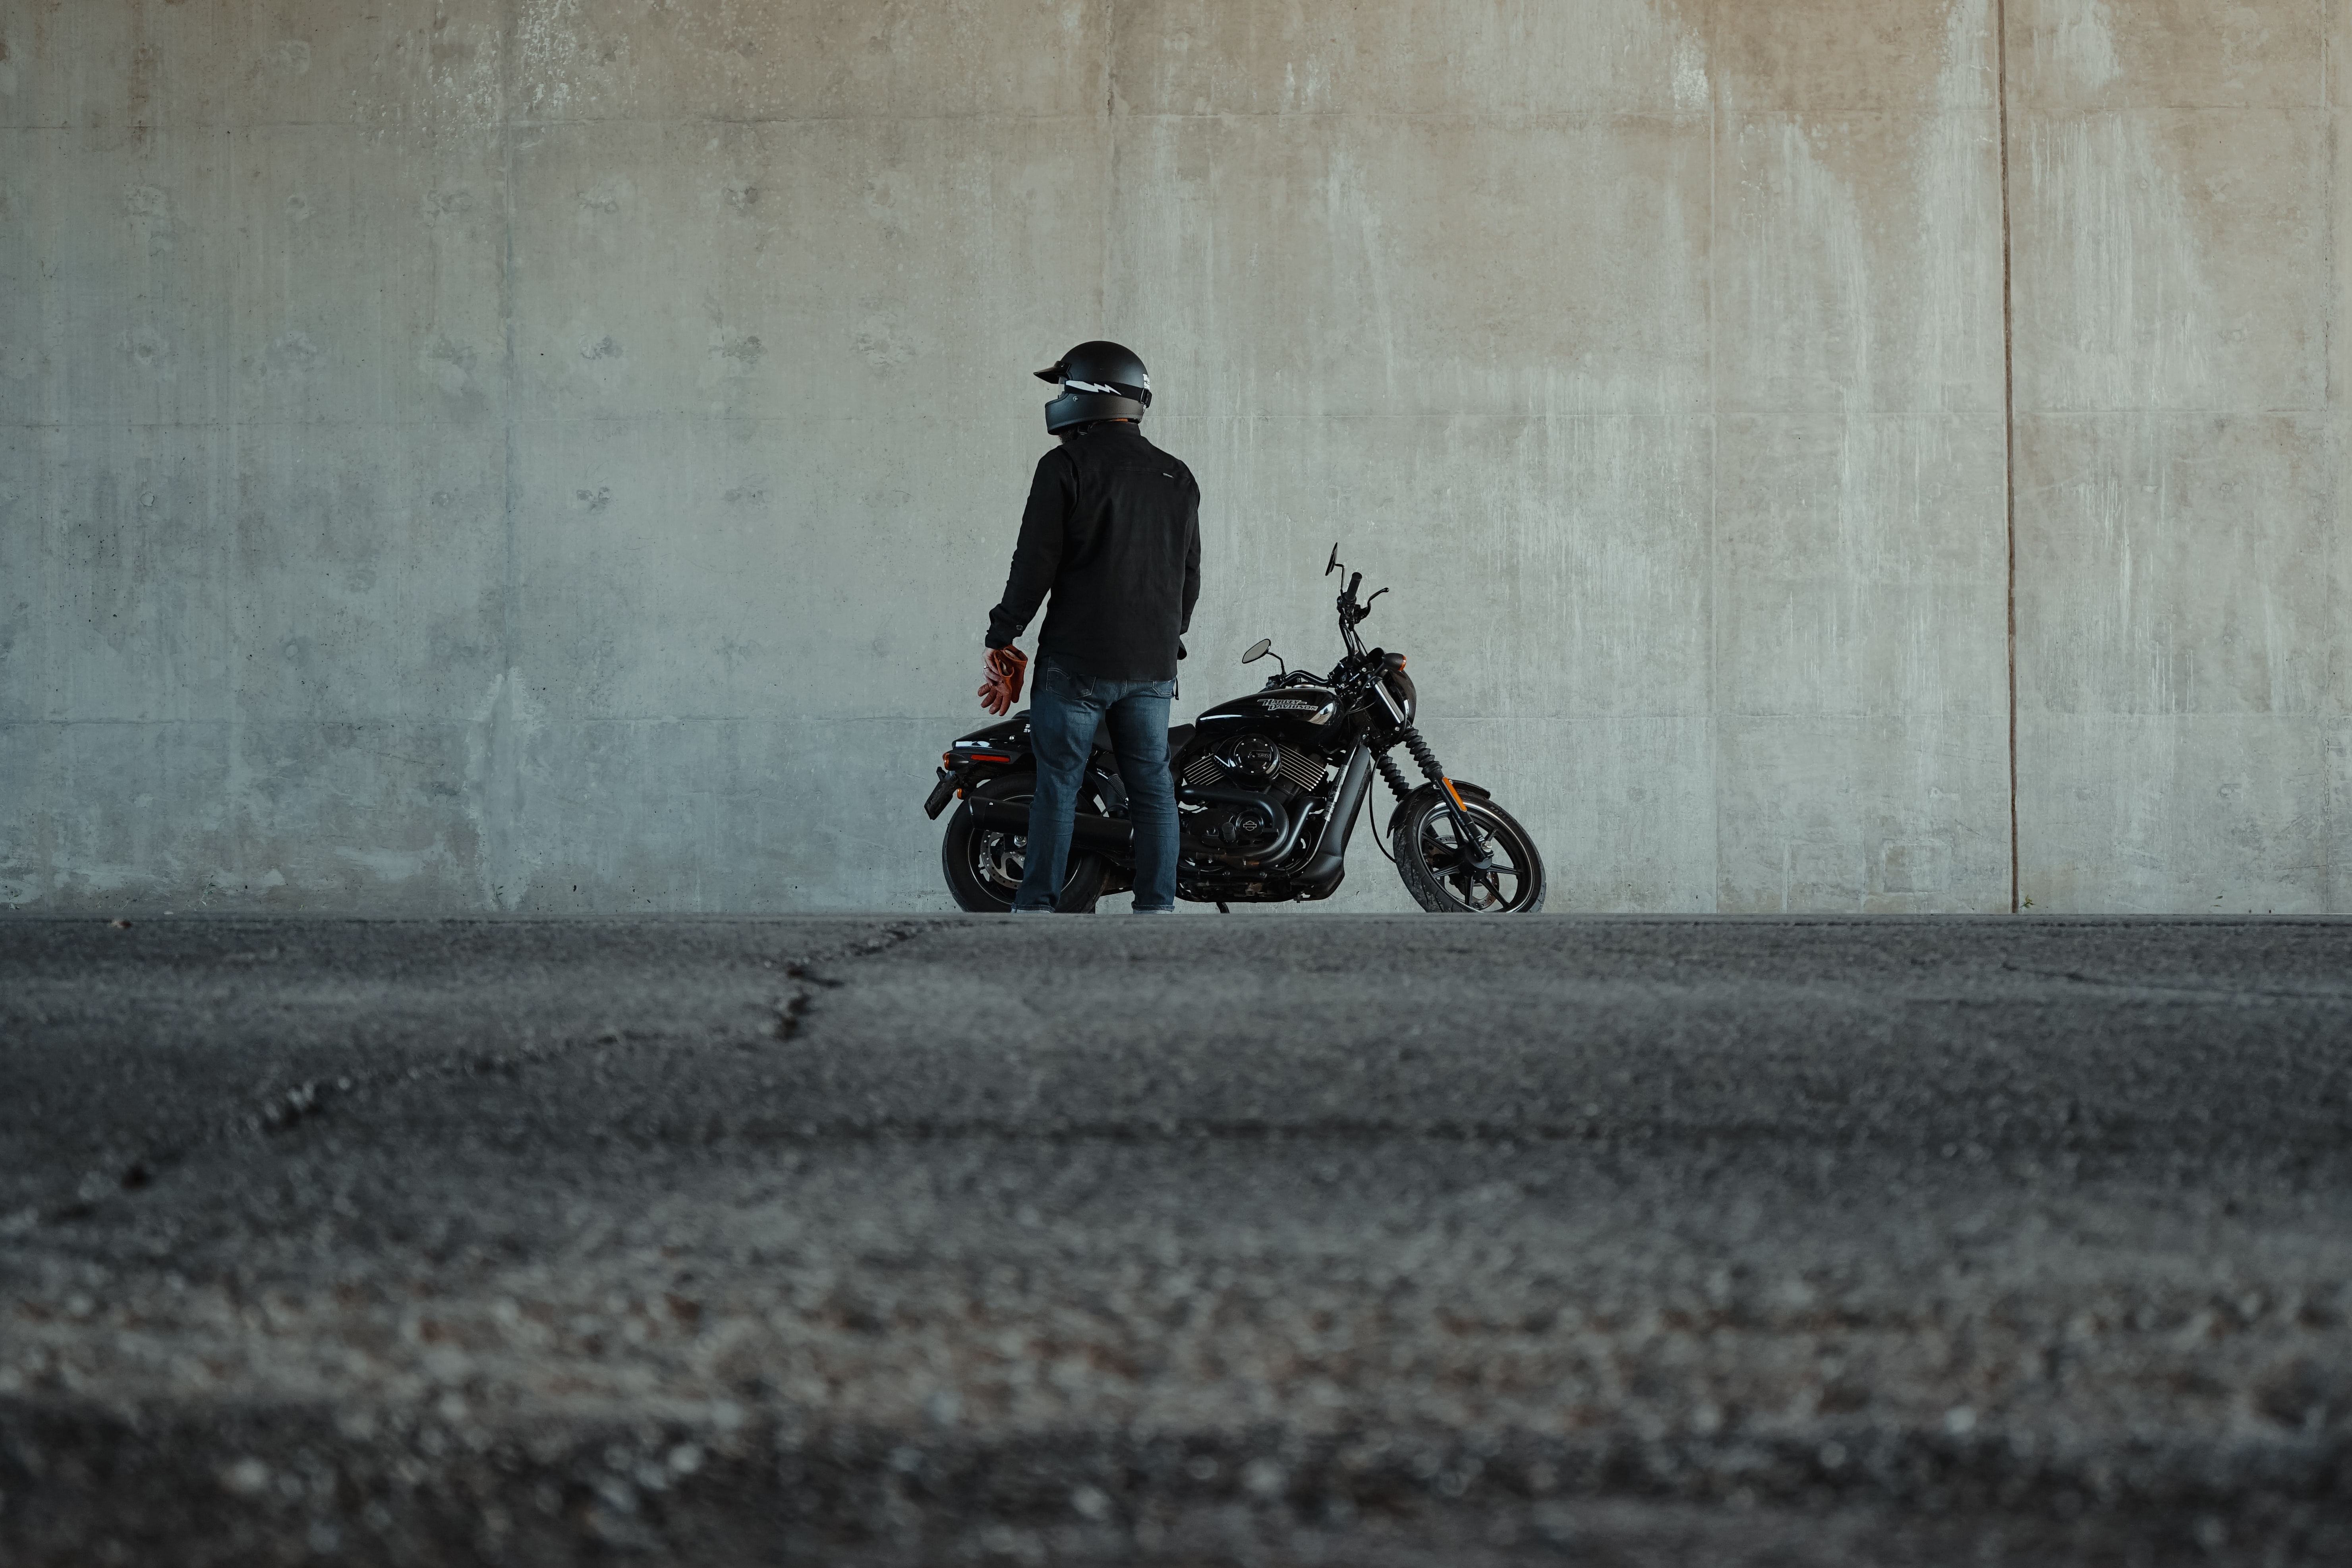 4K Phone Wallpaper side view, motorcyclists, motorcycle, motorcycles